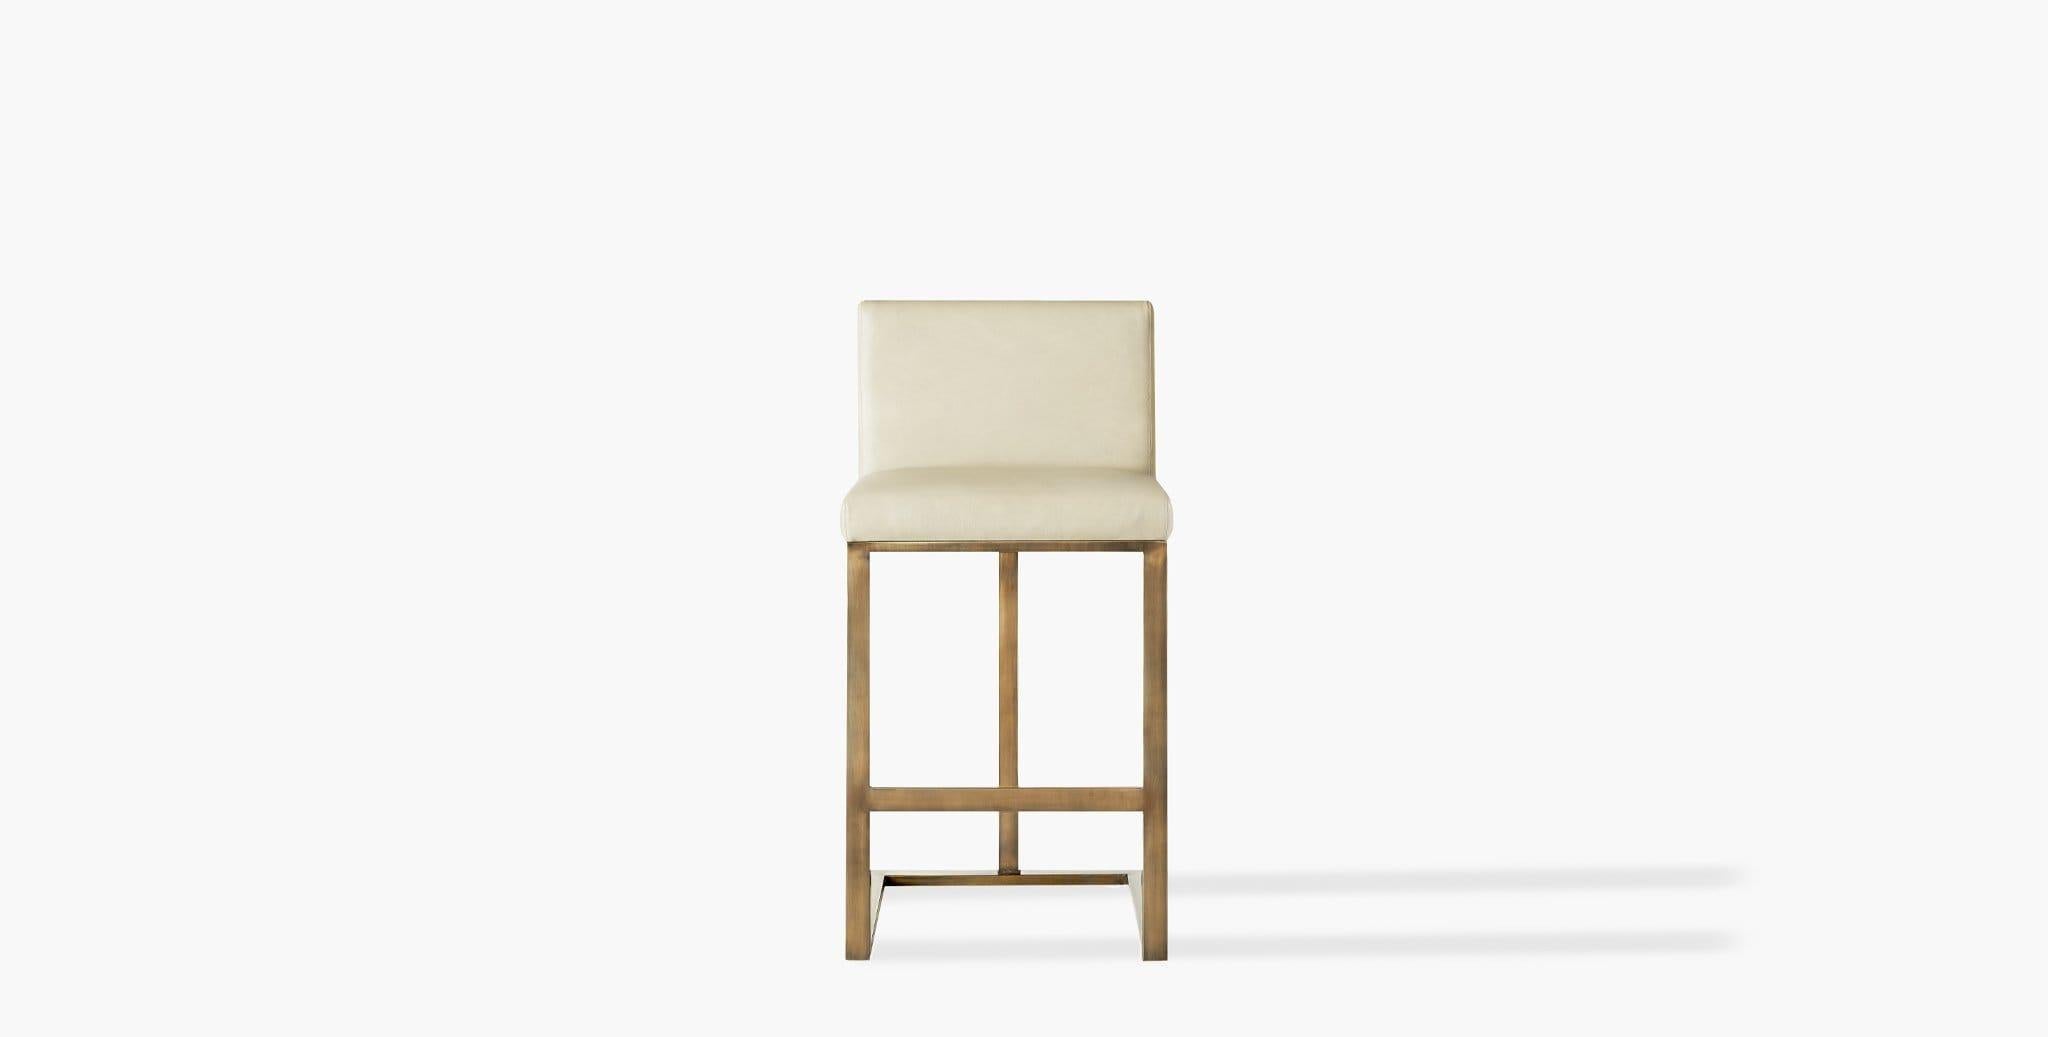 Our Savannah Bar Stool features clean lines, a padded seat, and a silhouette suitable for the most elegant spaces. Our handcrafted fabrics, leathers, and finishes are inspired by the natural variations within fibers, textures, and weaves. Each